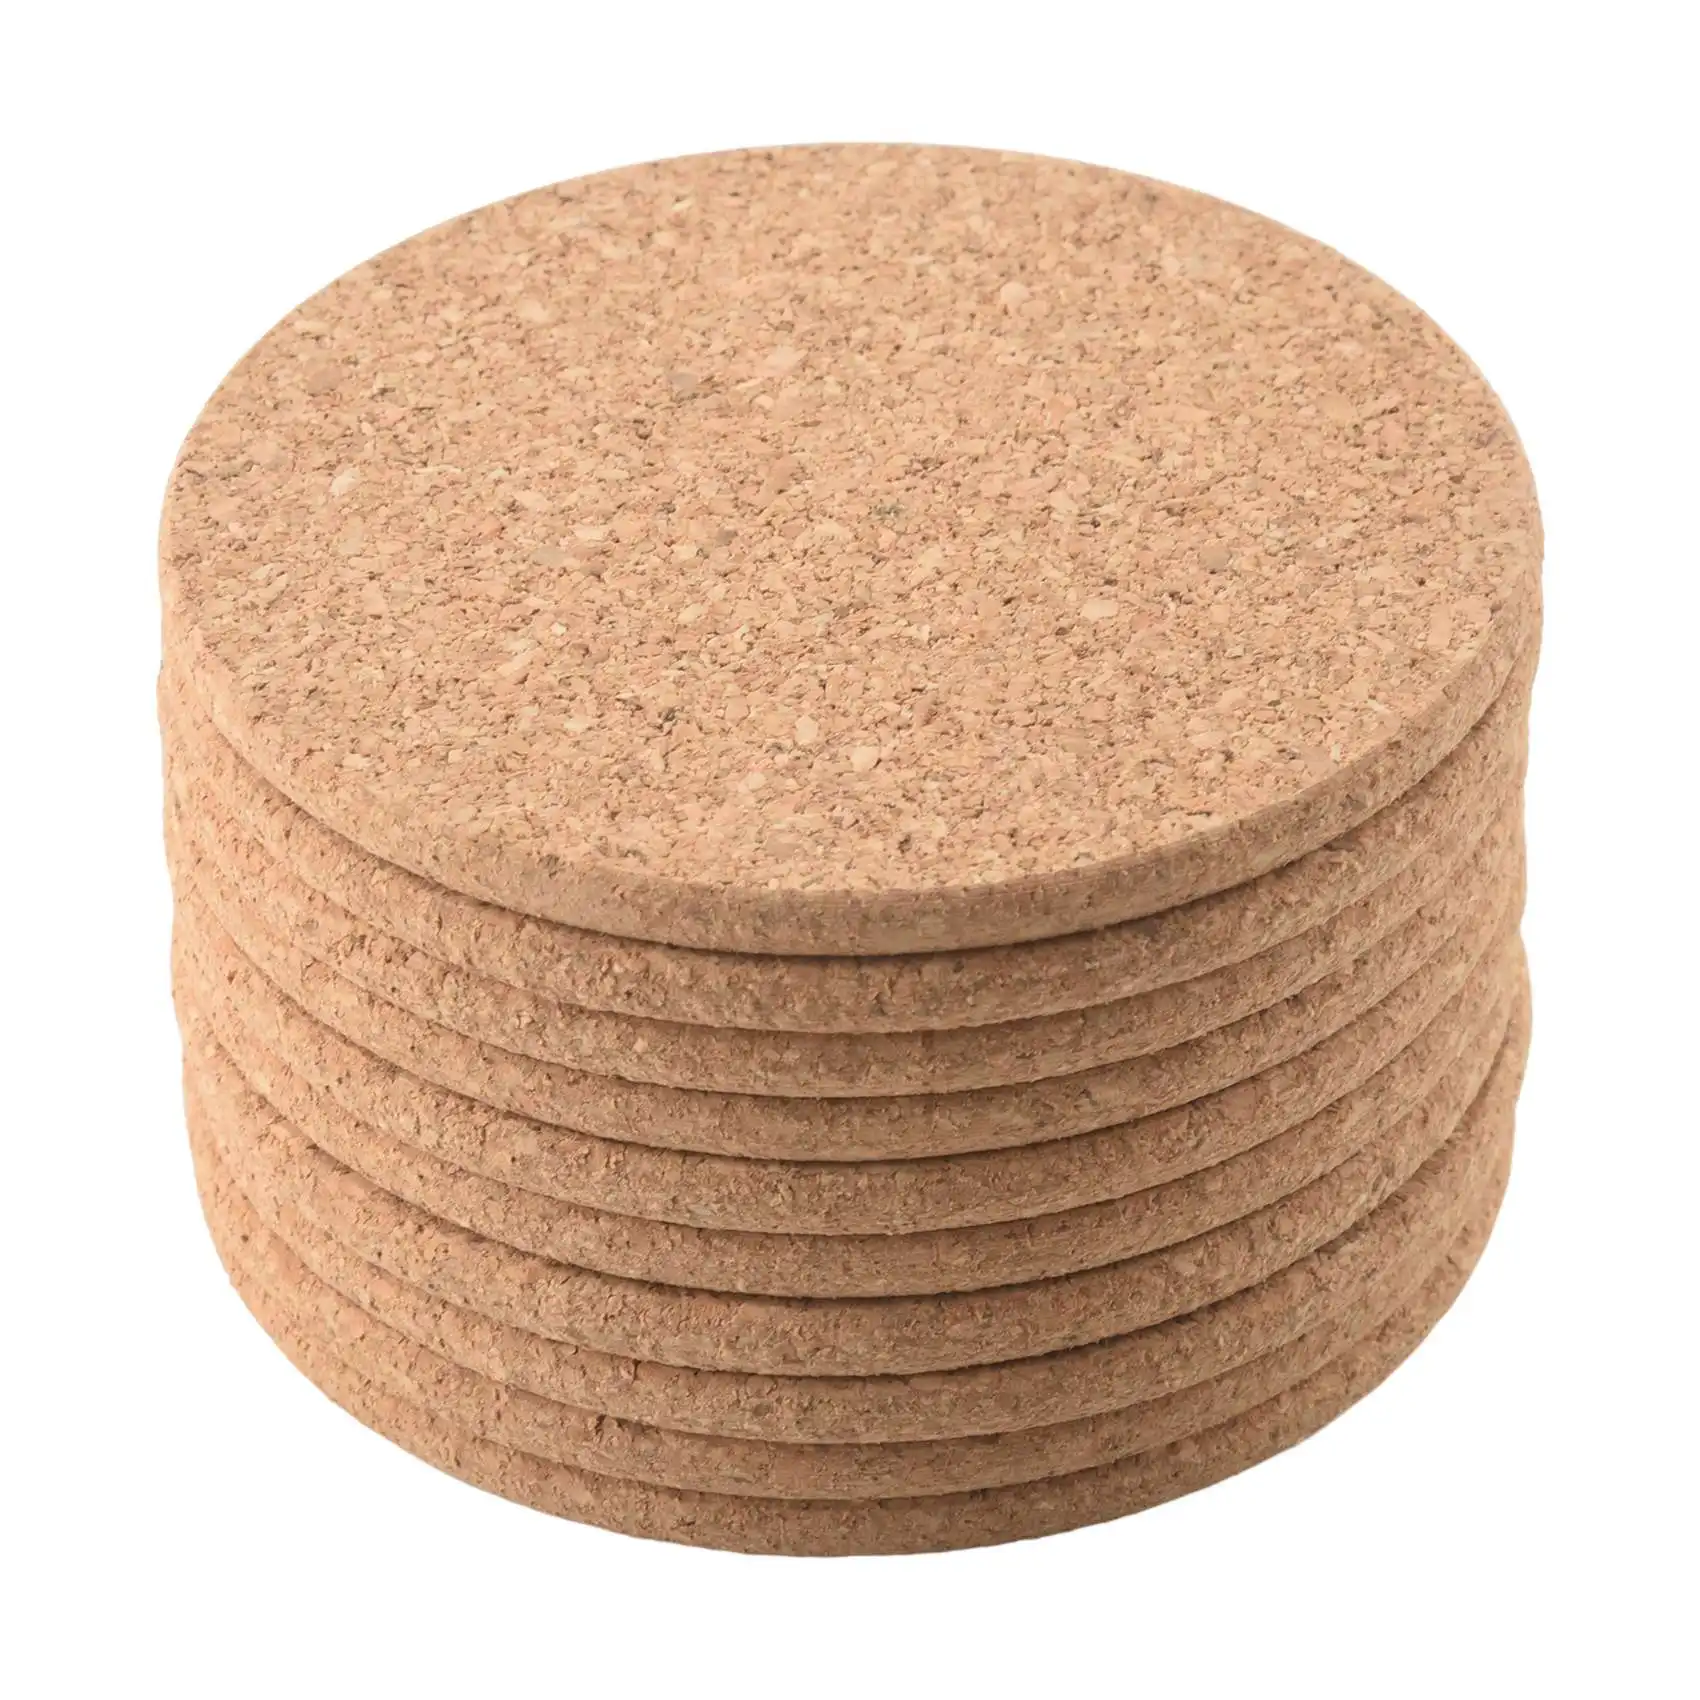 

Set of 10 Cork Bar Drink Coasters - Absorbent and Reusable - 90mm, 5mm Thick